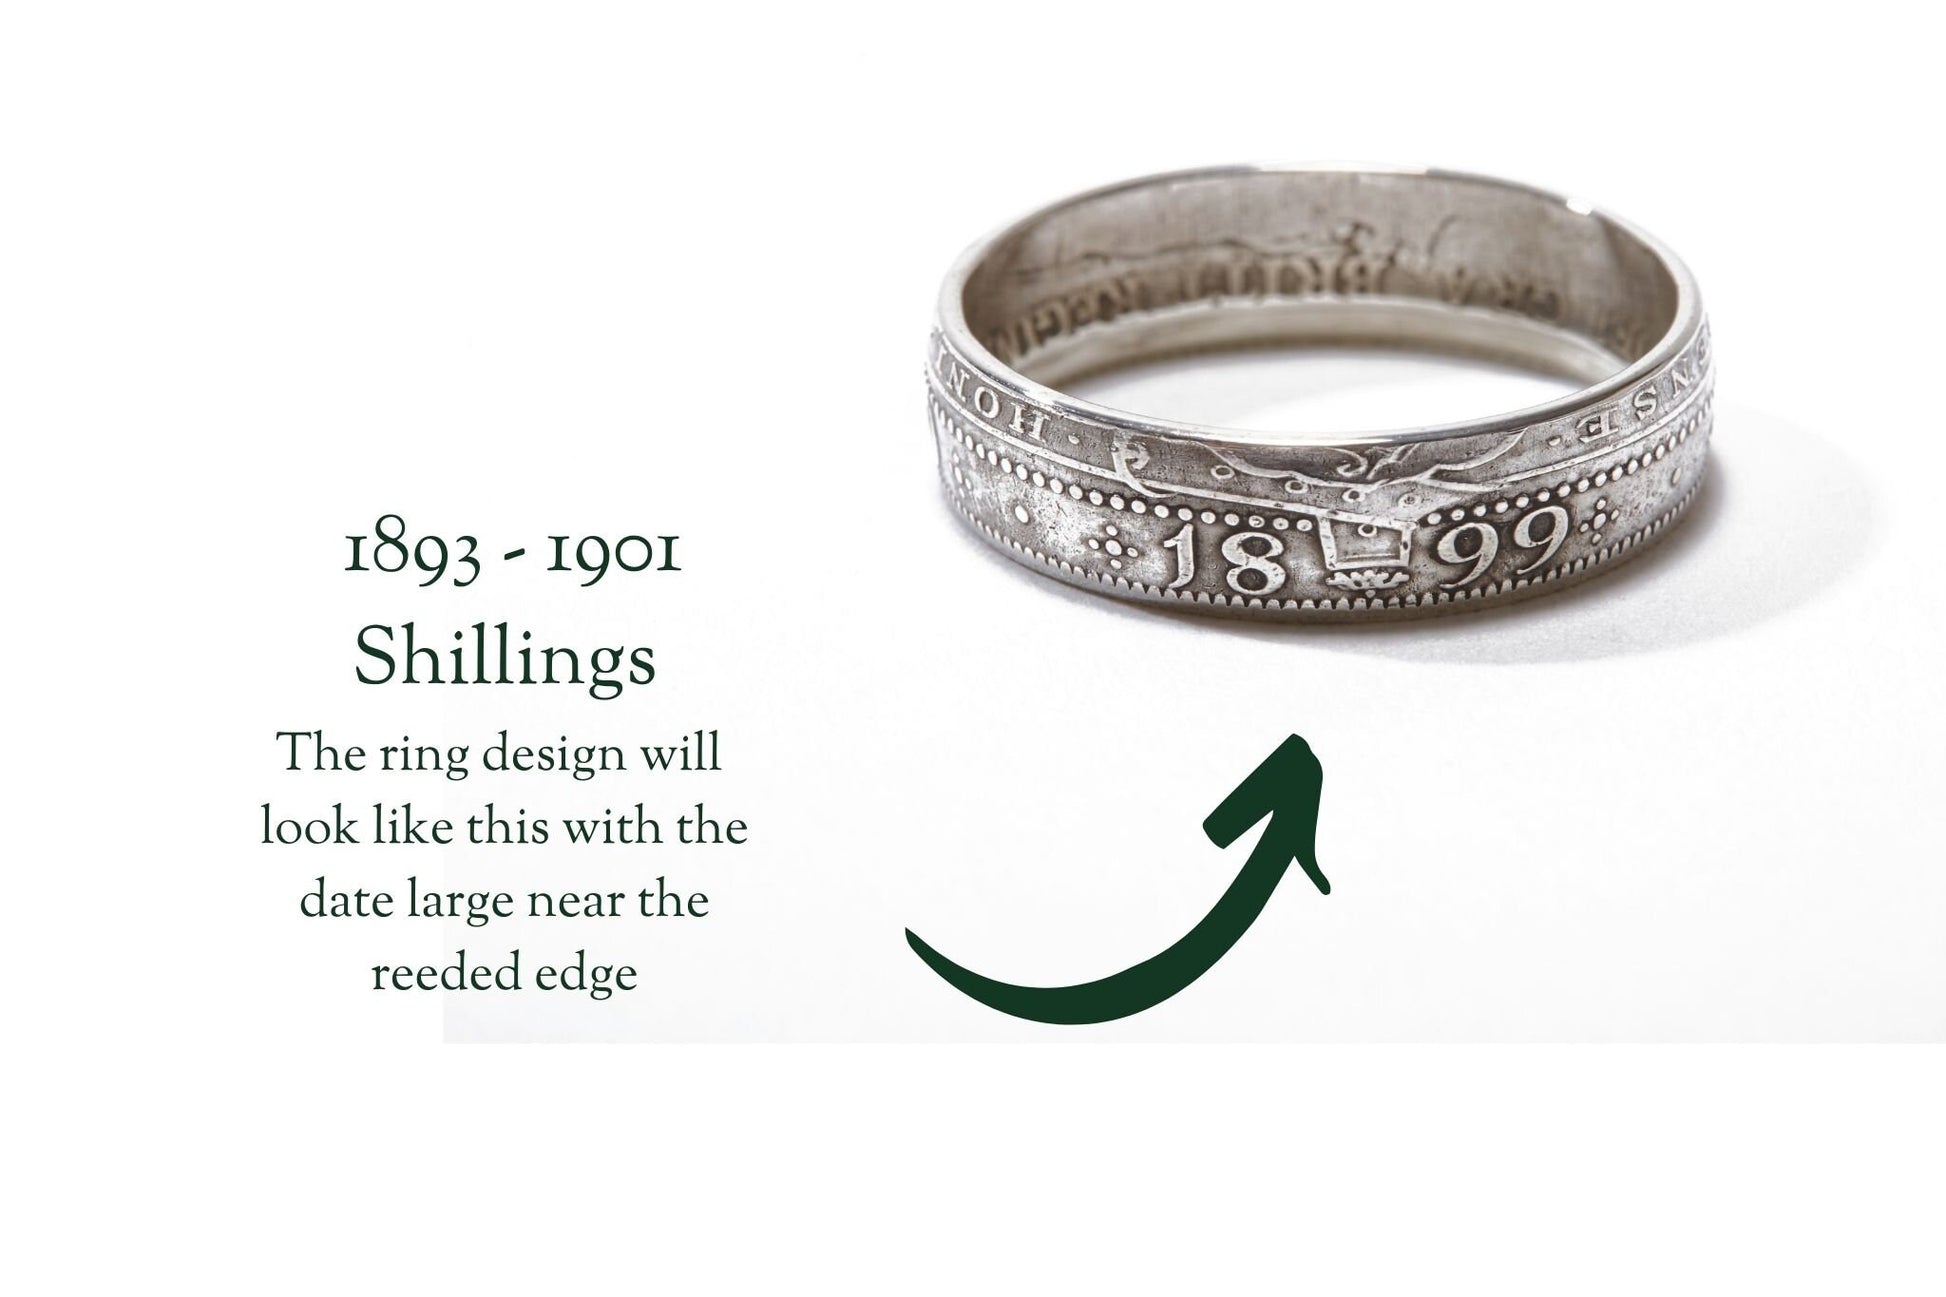 British Shilling Sterling Silver Coin Ring Wedding Band